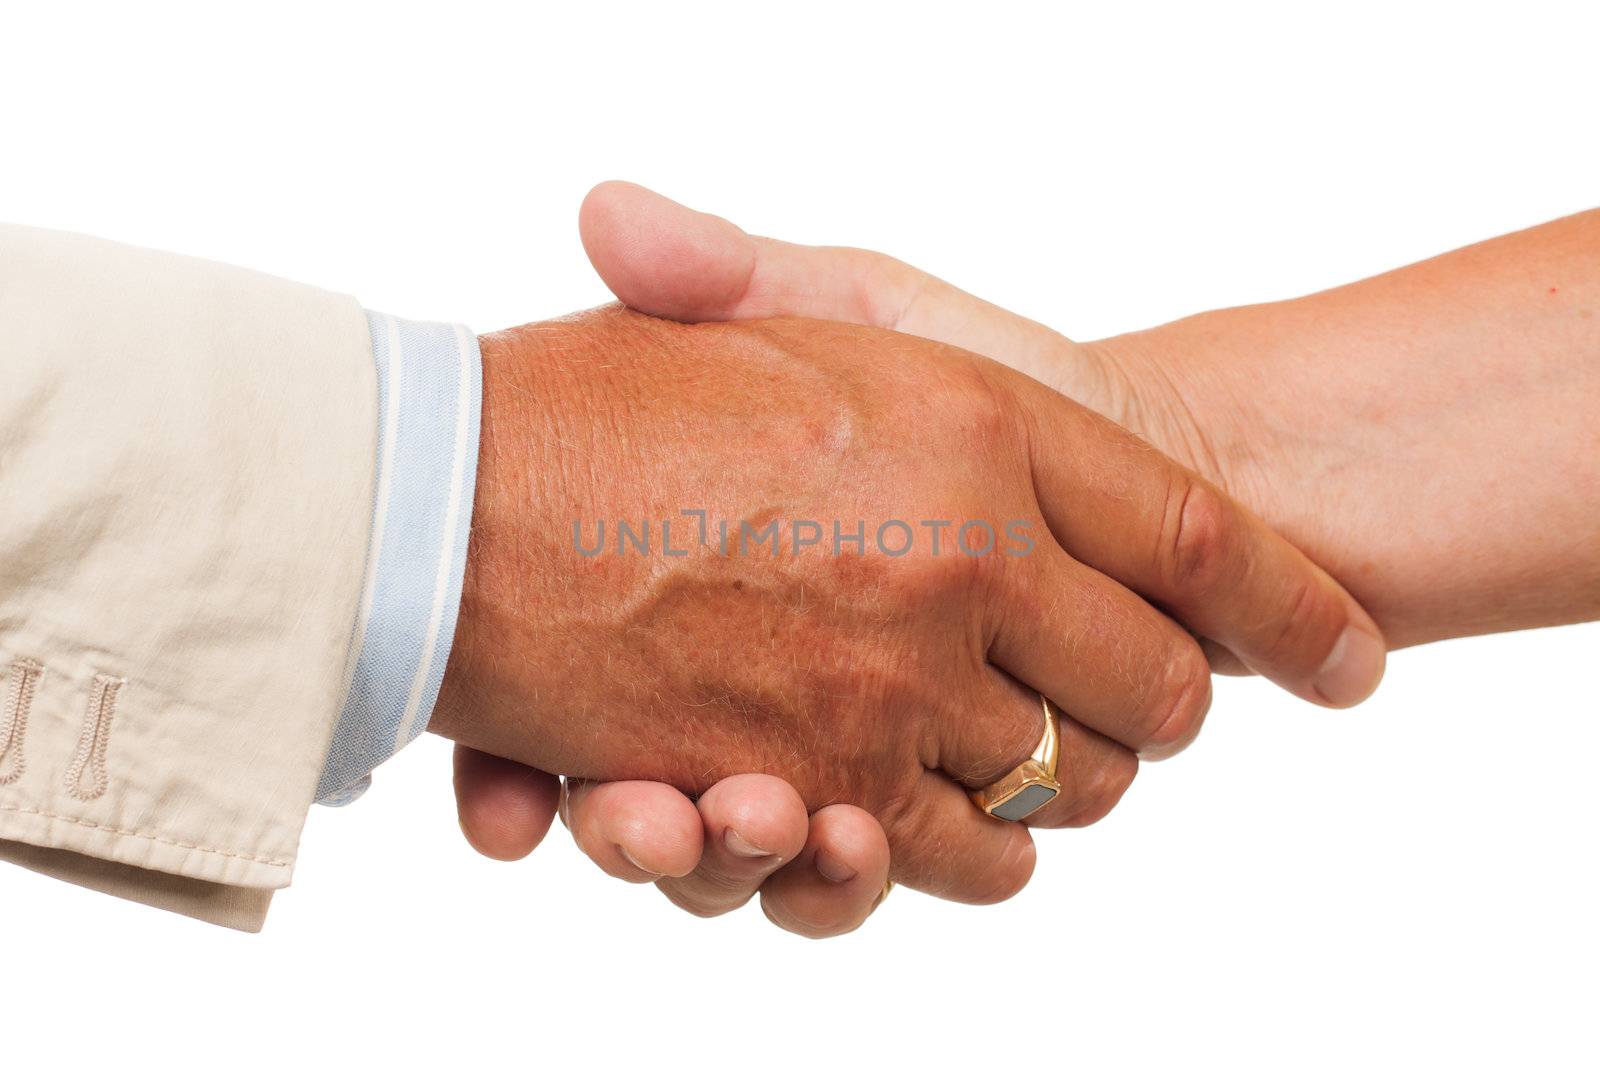 A close-up of a hand shake between a man and a woman. Isolated on white.